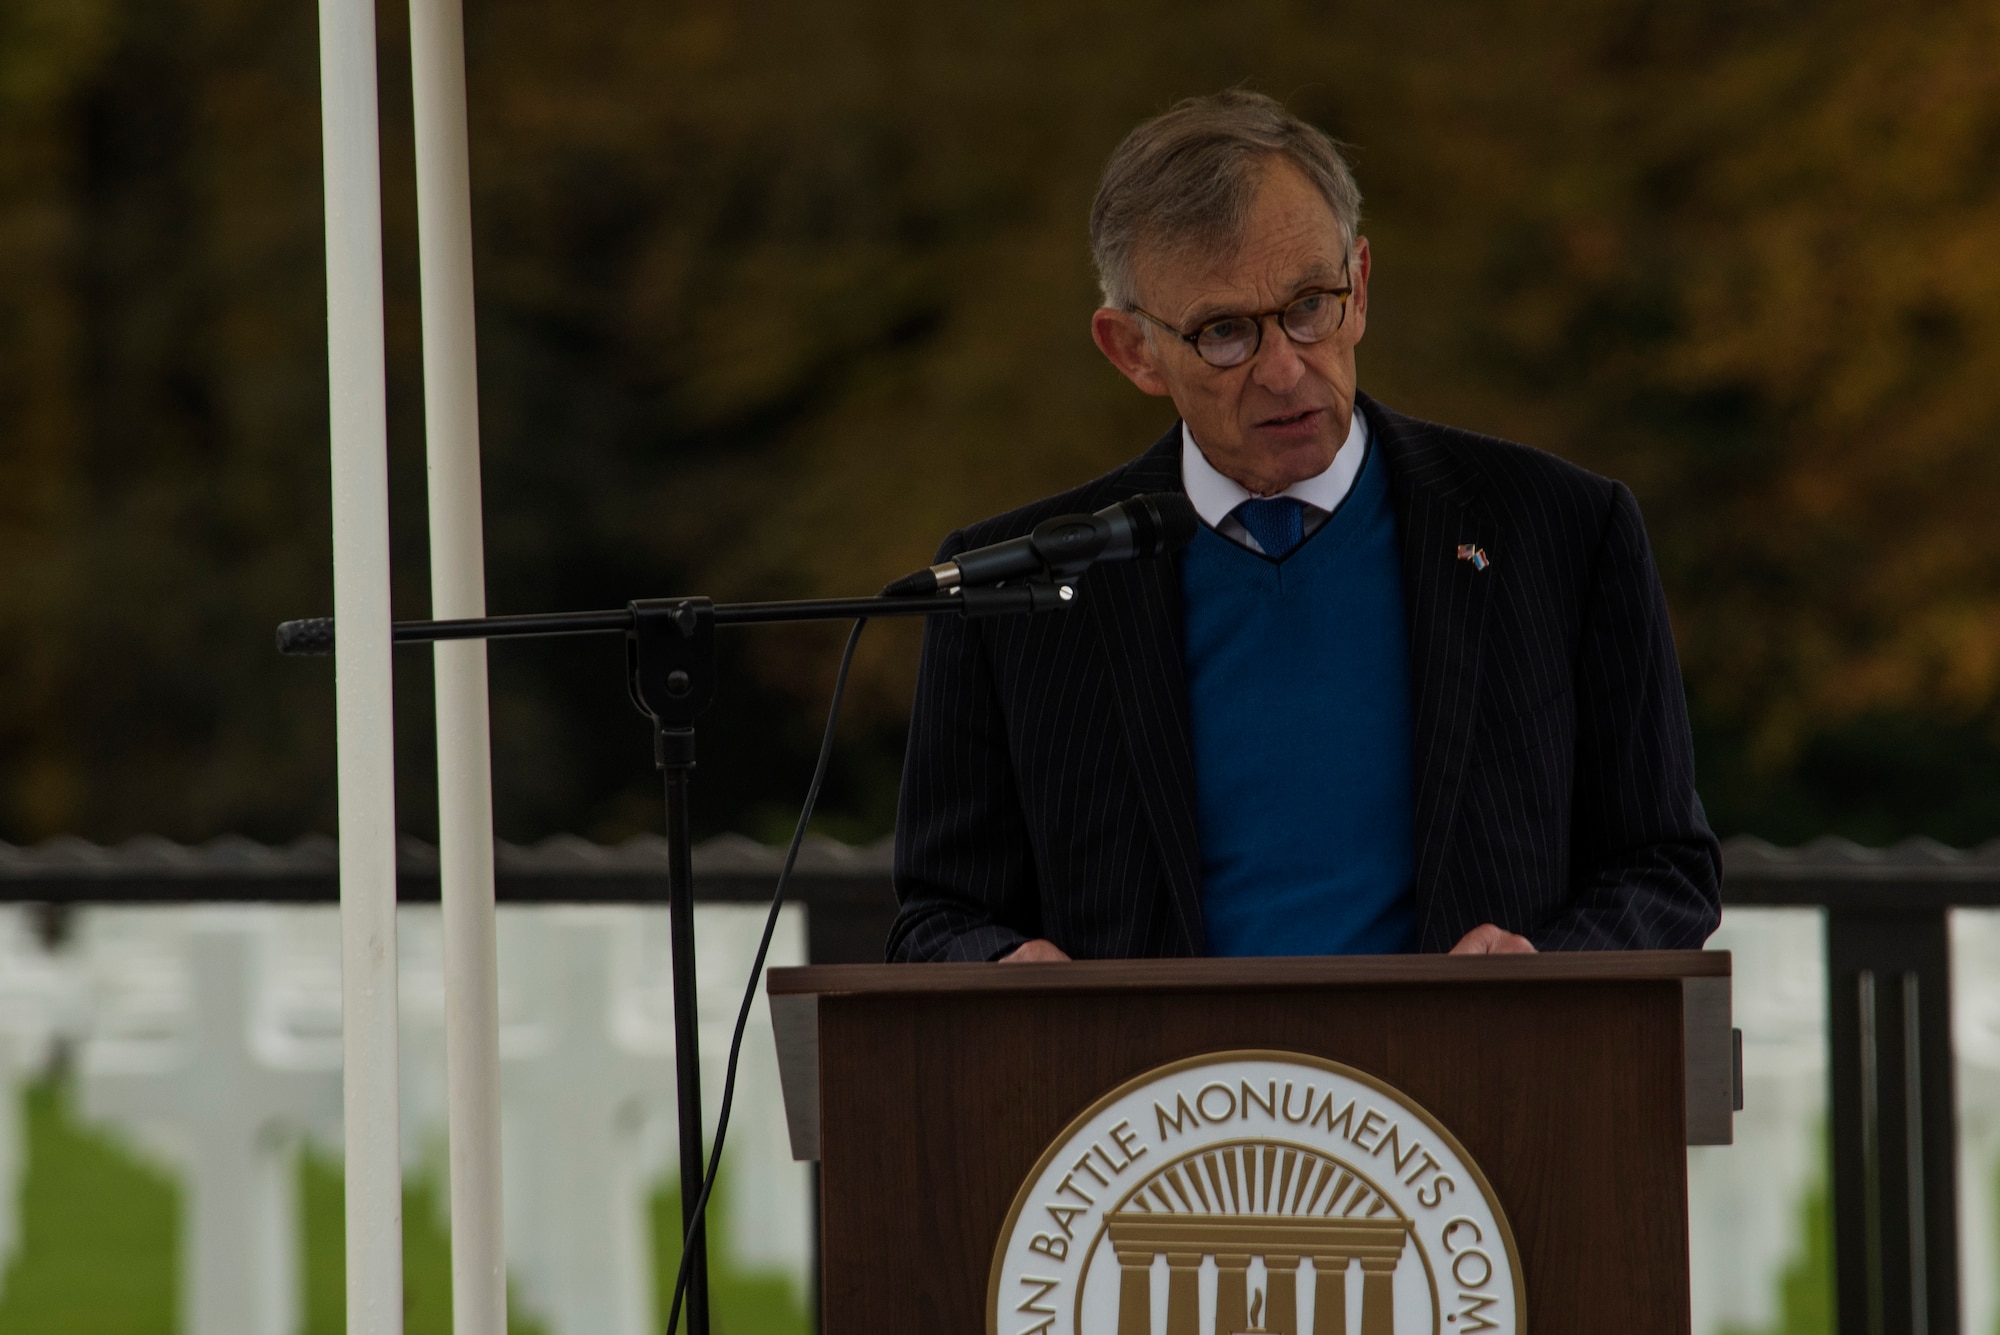 David McKean, U.S. Ambassador to the Grand Duchy of Luxembourg, speaks during a Memorial Day ceremony at the Luxembourg American Military Cemetery and Memorial in Luxembourg, Nov. 11, 2016. The ceremony paid tribute to the legacy of service of members of the American armed forces. (U.S. Air Force photo by Staff Sgt. Joe W. McFadden)